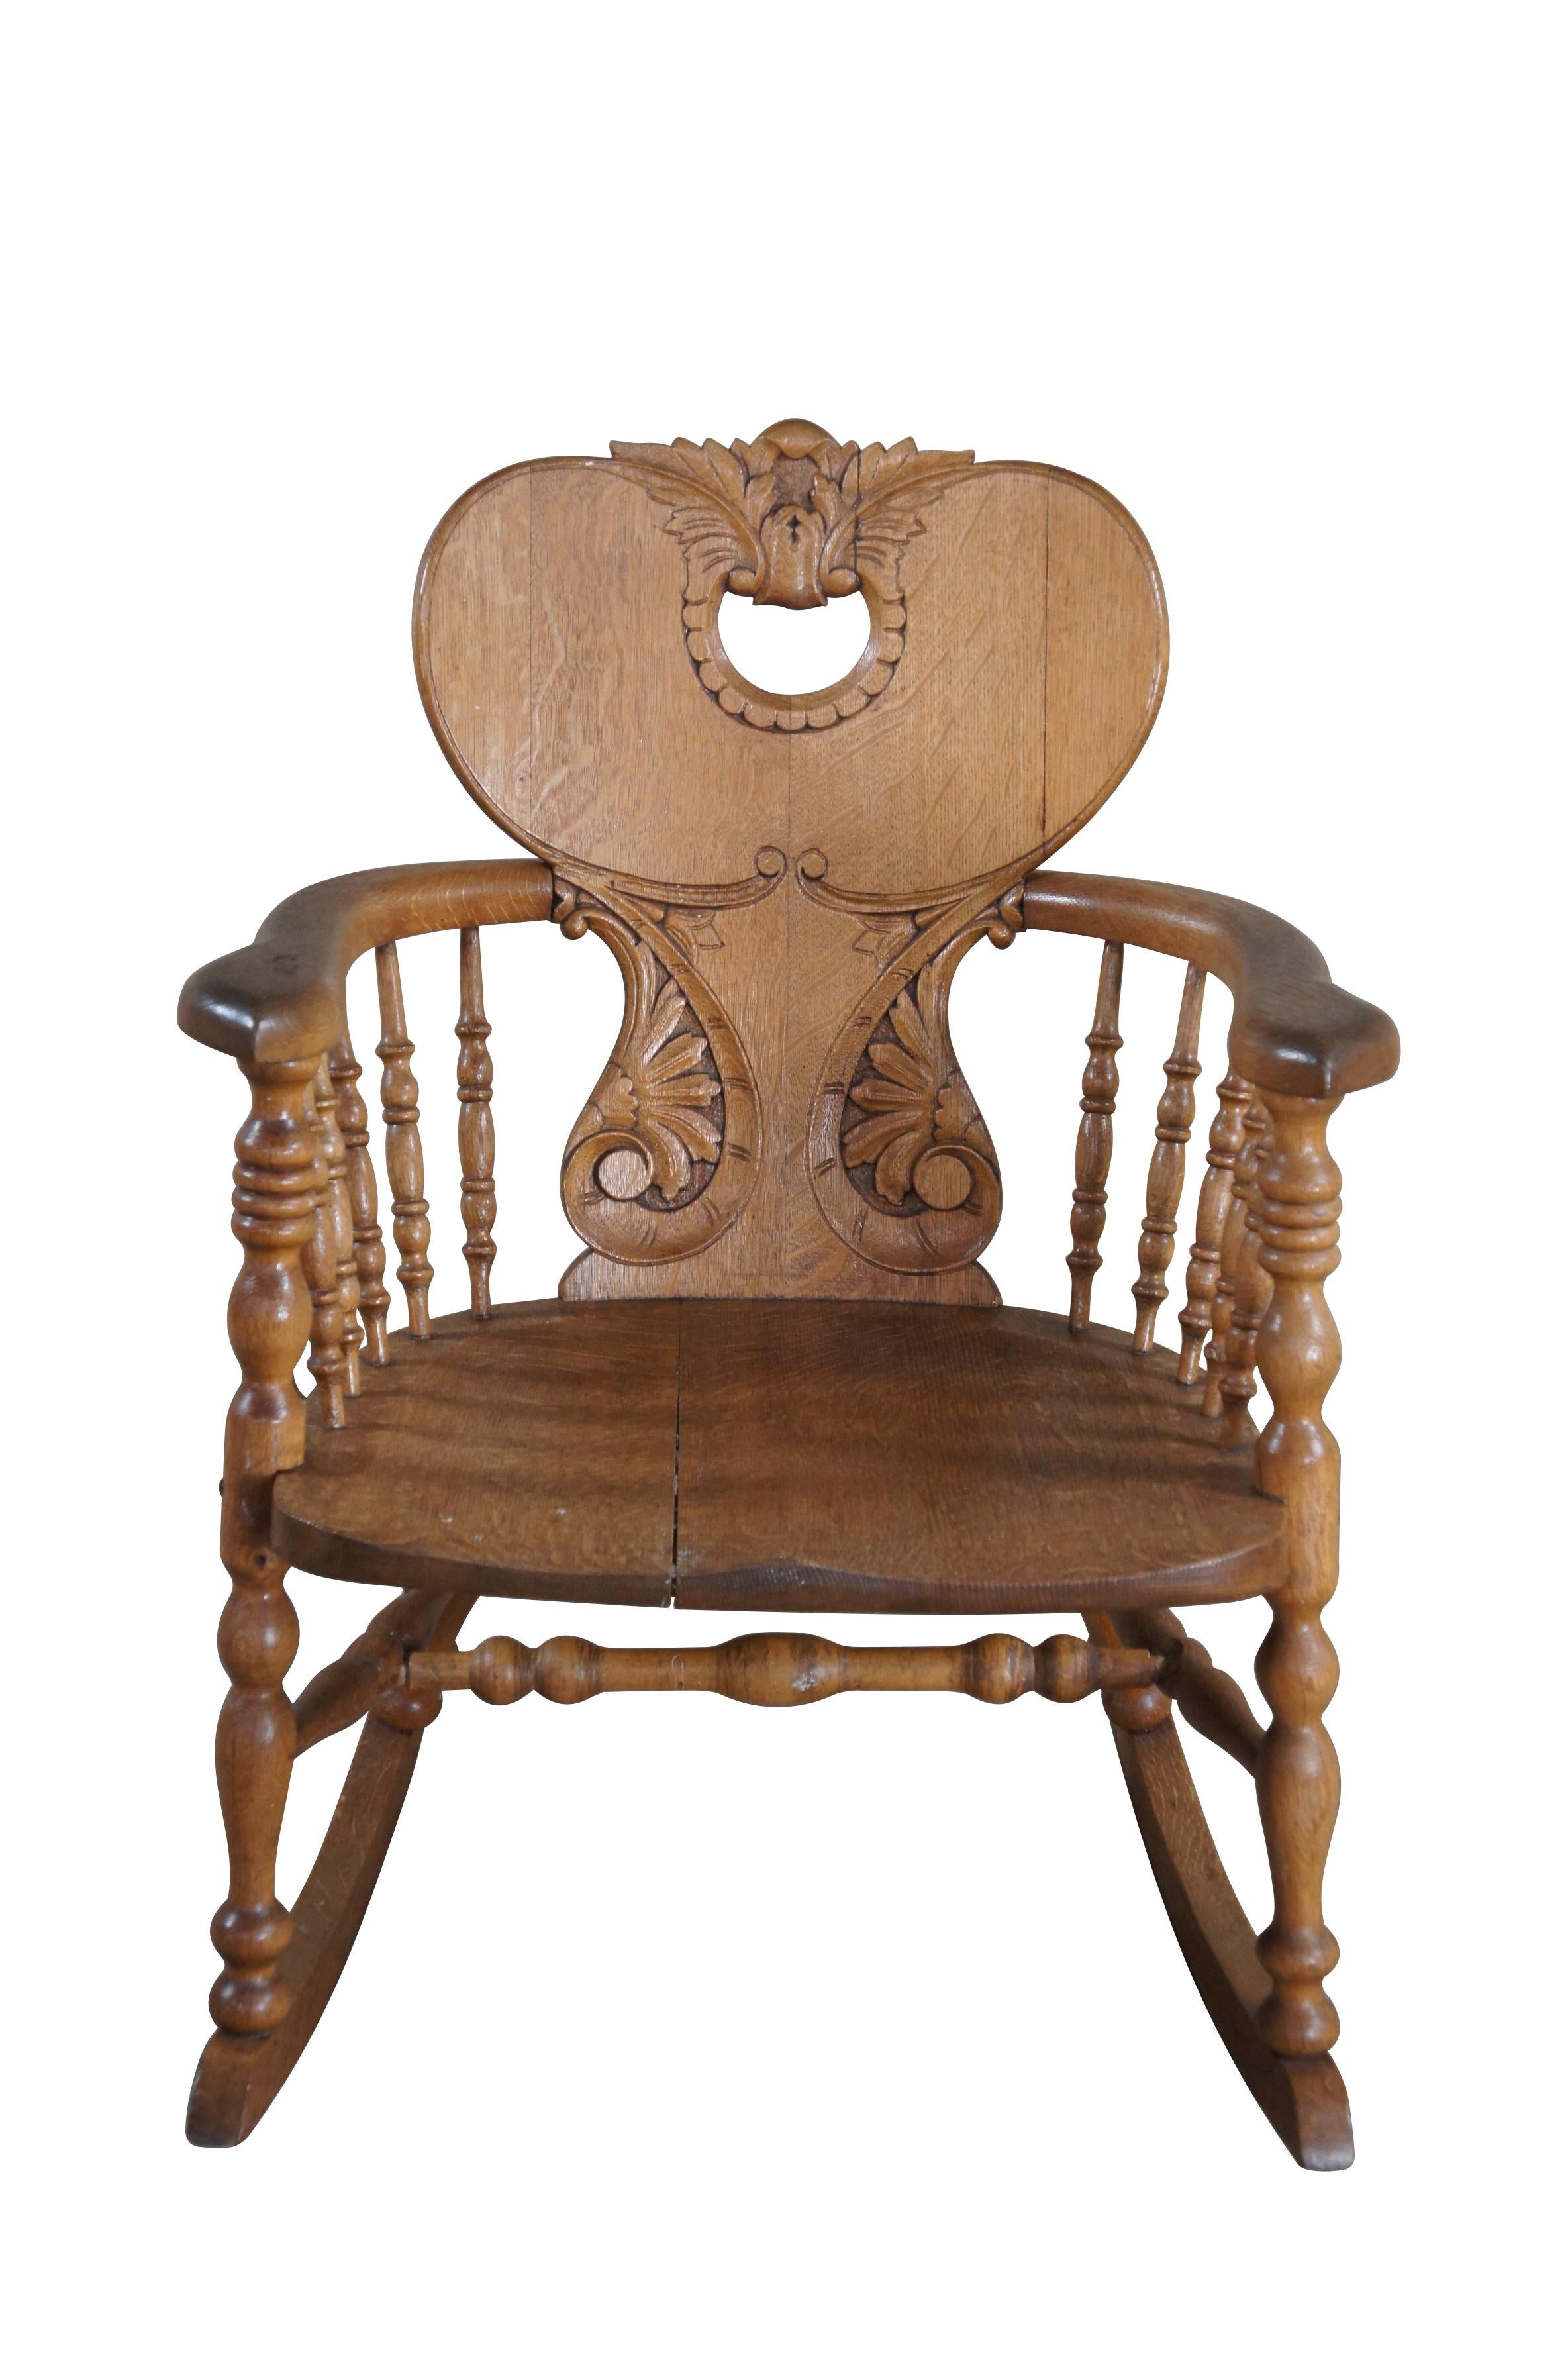 Late Victorian Rocking Chair.  Attributed to Stomps Burkhardt of Dayton, Ohio.  Made from quartersawn oak with a heart shaped back, carved and pierced with acanthus foliate and 